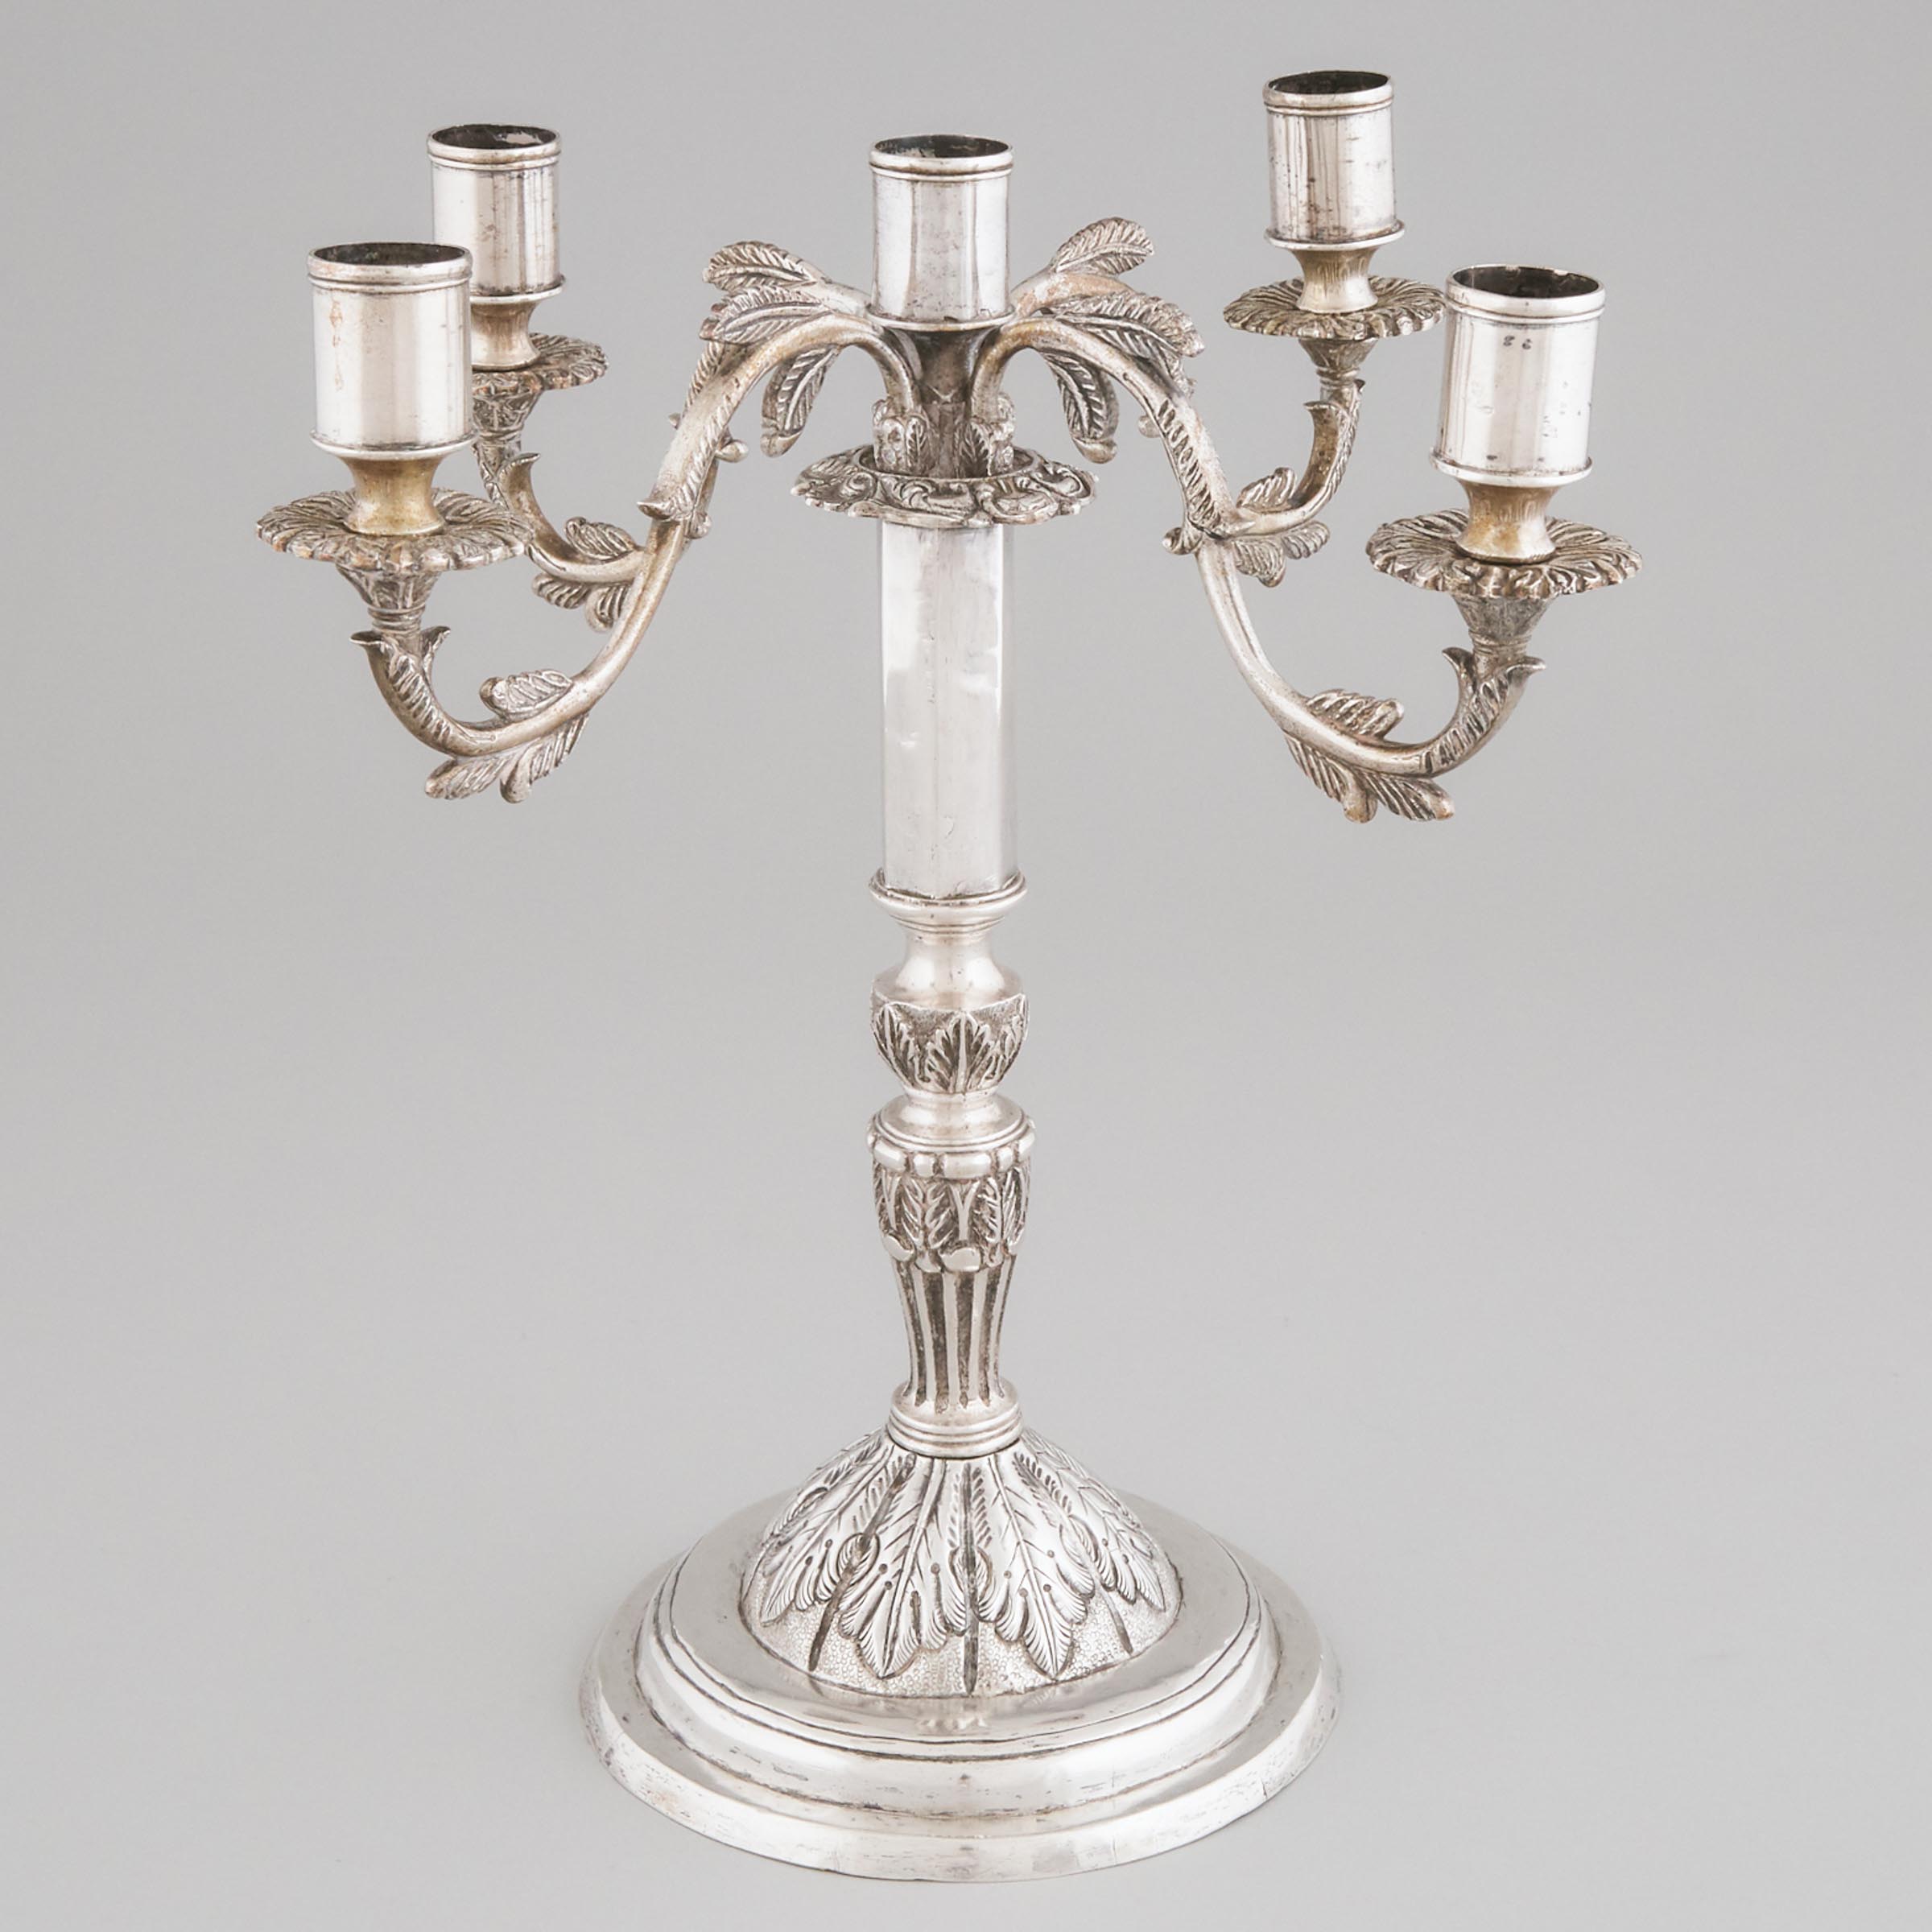 Peruvian Silver Five-Light Candelabrum, late 19th/early 20th century